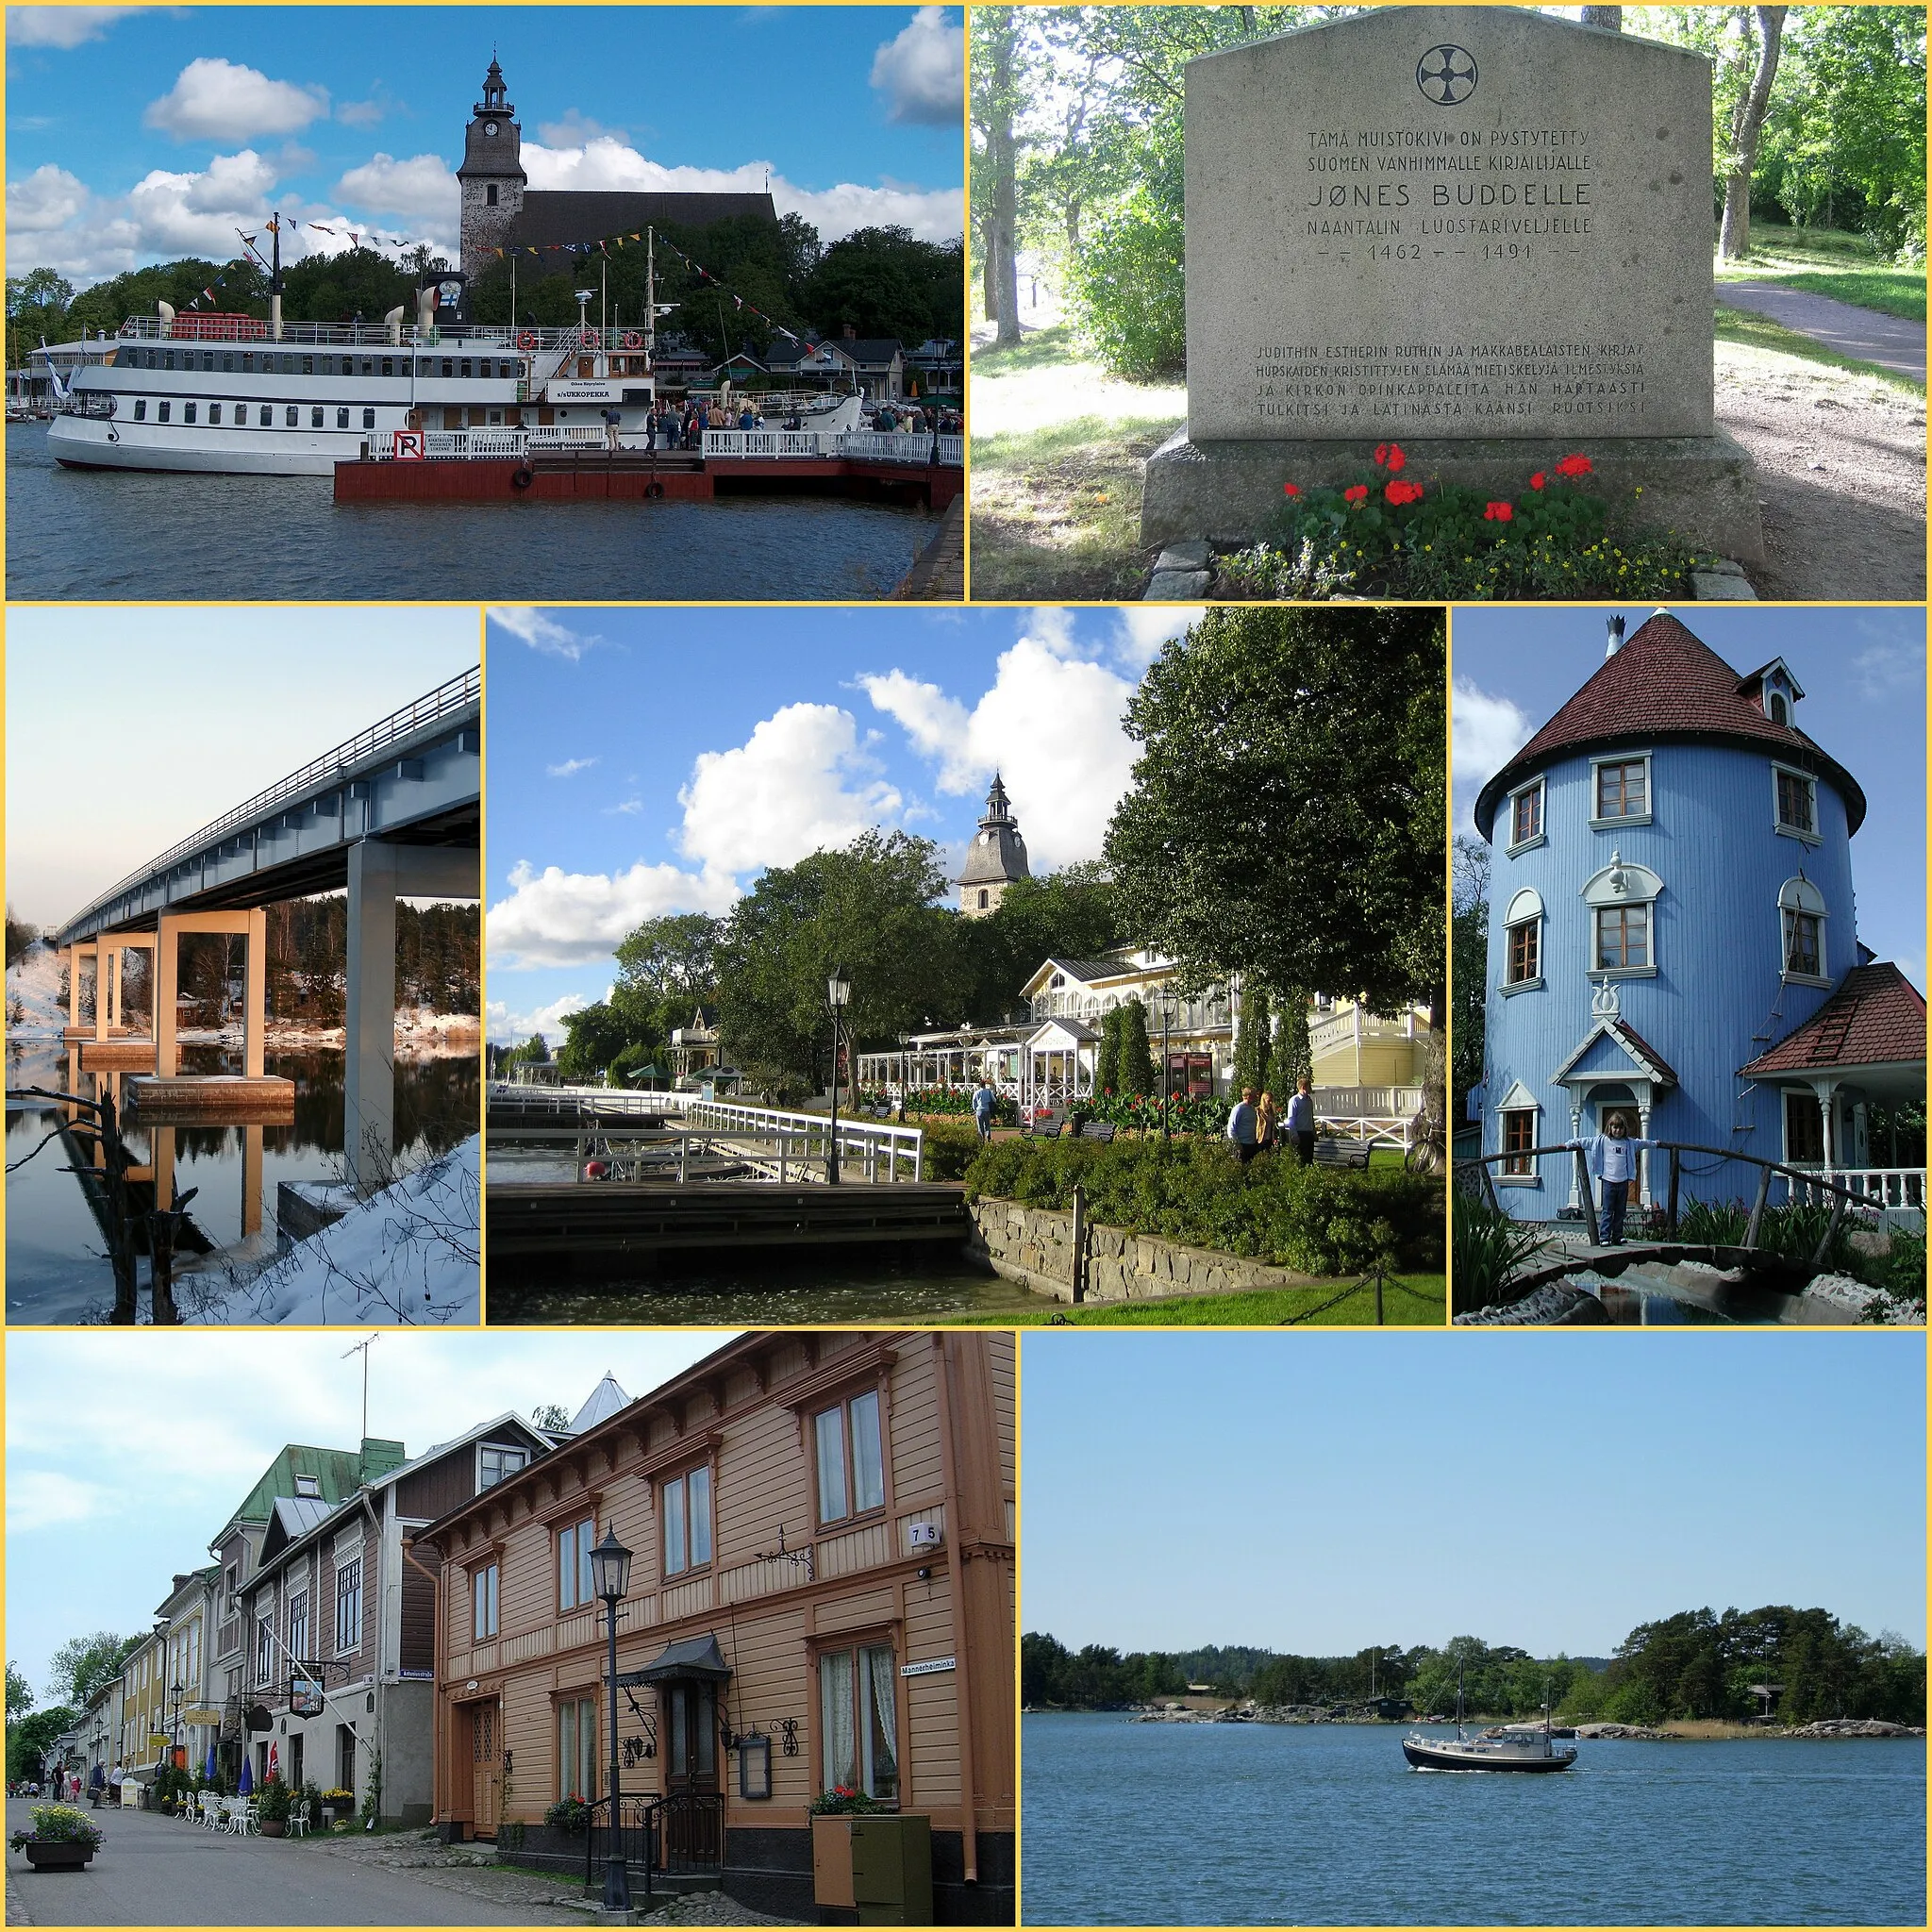 Photo showing: Images, from top, left to right:
Top left: Church of Naantali and SS Ukkopekka by 	Timo Renberg (GFDL)
Top right: Jöns Budde statue by Tomisti (GDFL)
Middle left: Särkänsalmi bridge by Markus Rantala (Makele-90) (CC-by-3.0)
Middle: the guest harbour and old city of Naantali by Tomisti (GFDL)
Middle right: Moomin's haus in Muumimaailma (Moominsland) by Pawel Drozd (Drozdp) (GDFL)
Bottom left: Naantali old city by Erno Miettinen (CC-by-2.0)
Bottom right: Archipelago of Naantali by Samuli Lintula